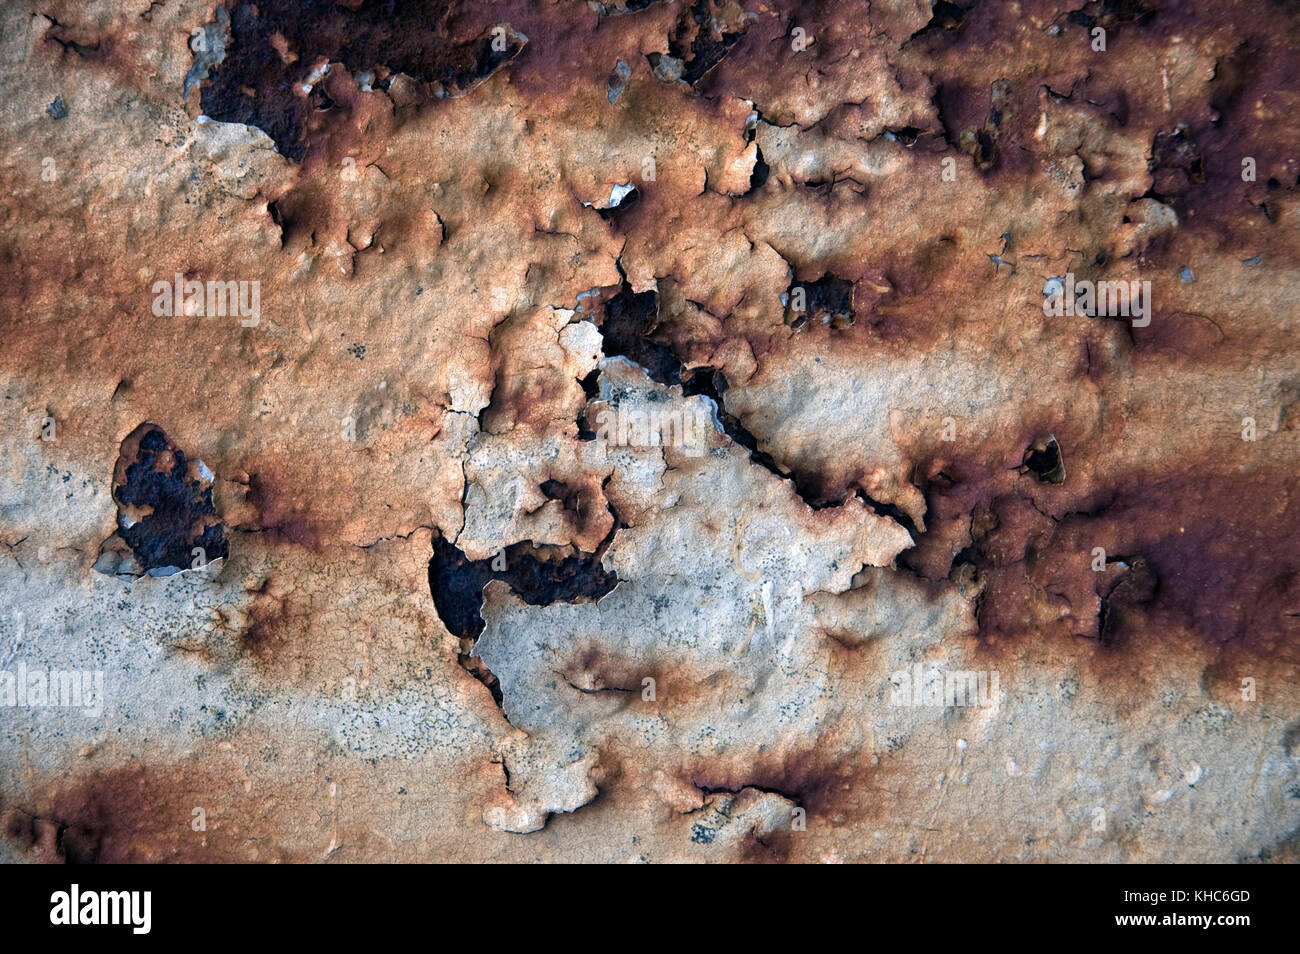 Detailed close-up images of rust patterns and textures. Stock Photo